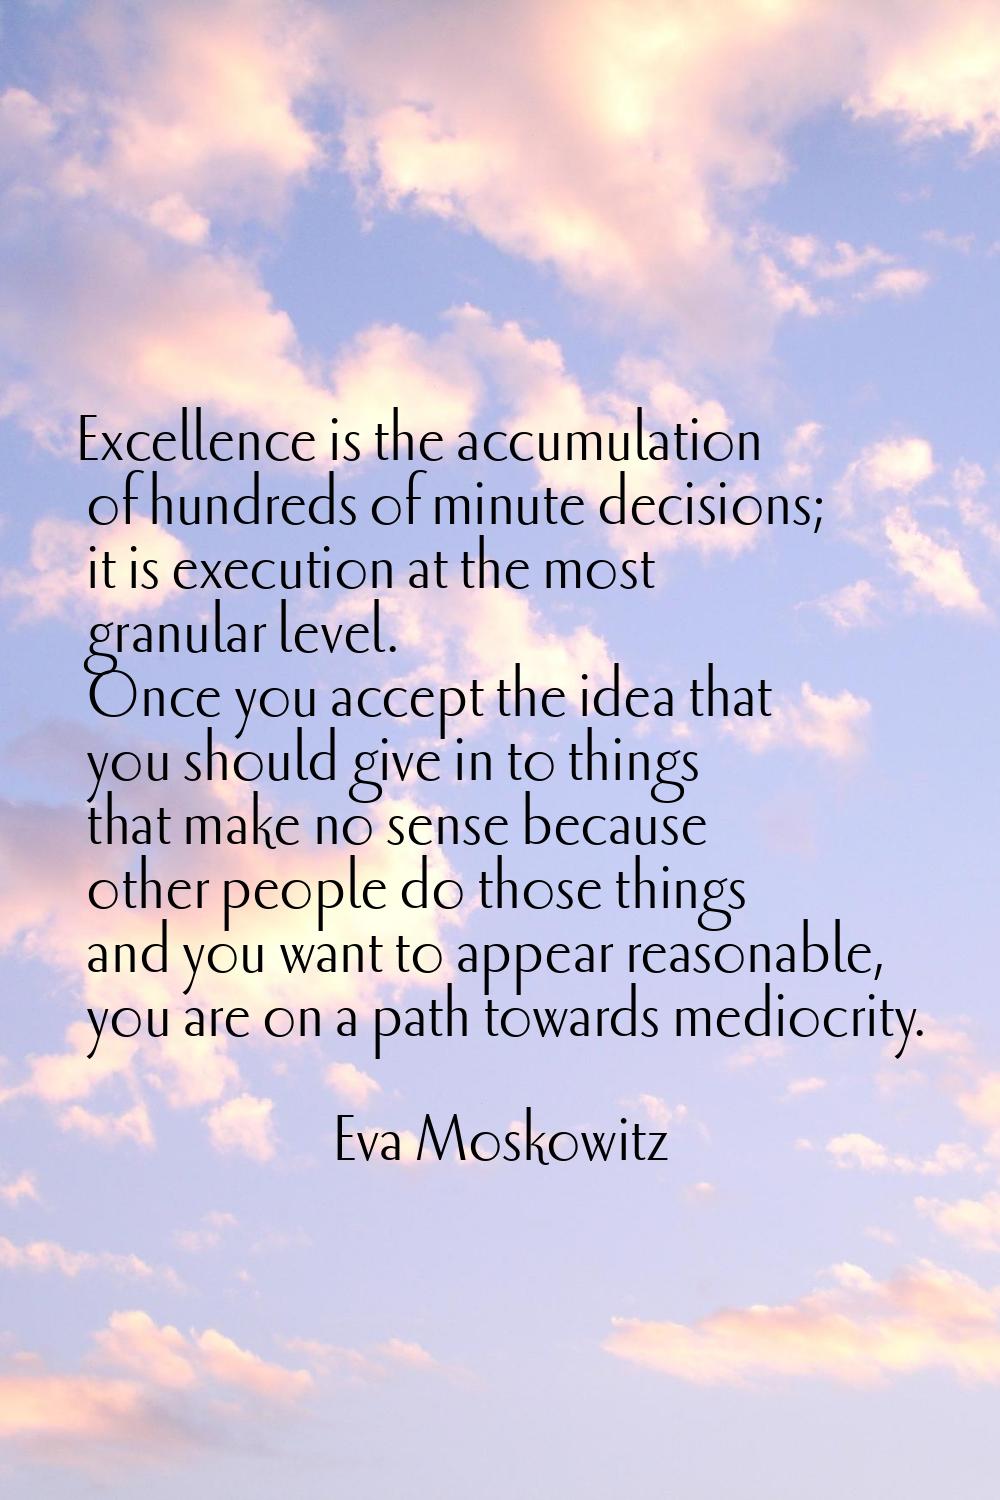 Excellence is the accumulation of hundreds of minute decisions; it is execution at the most granula